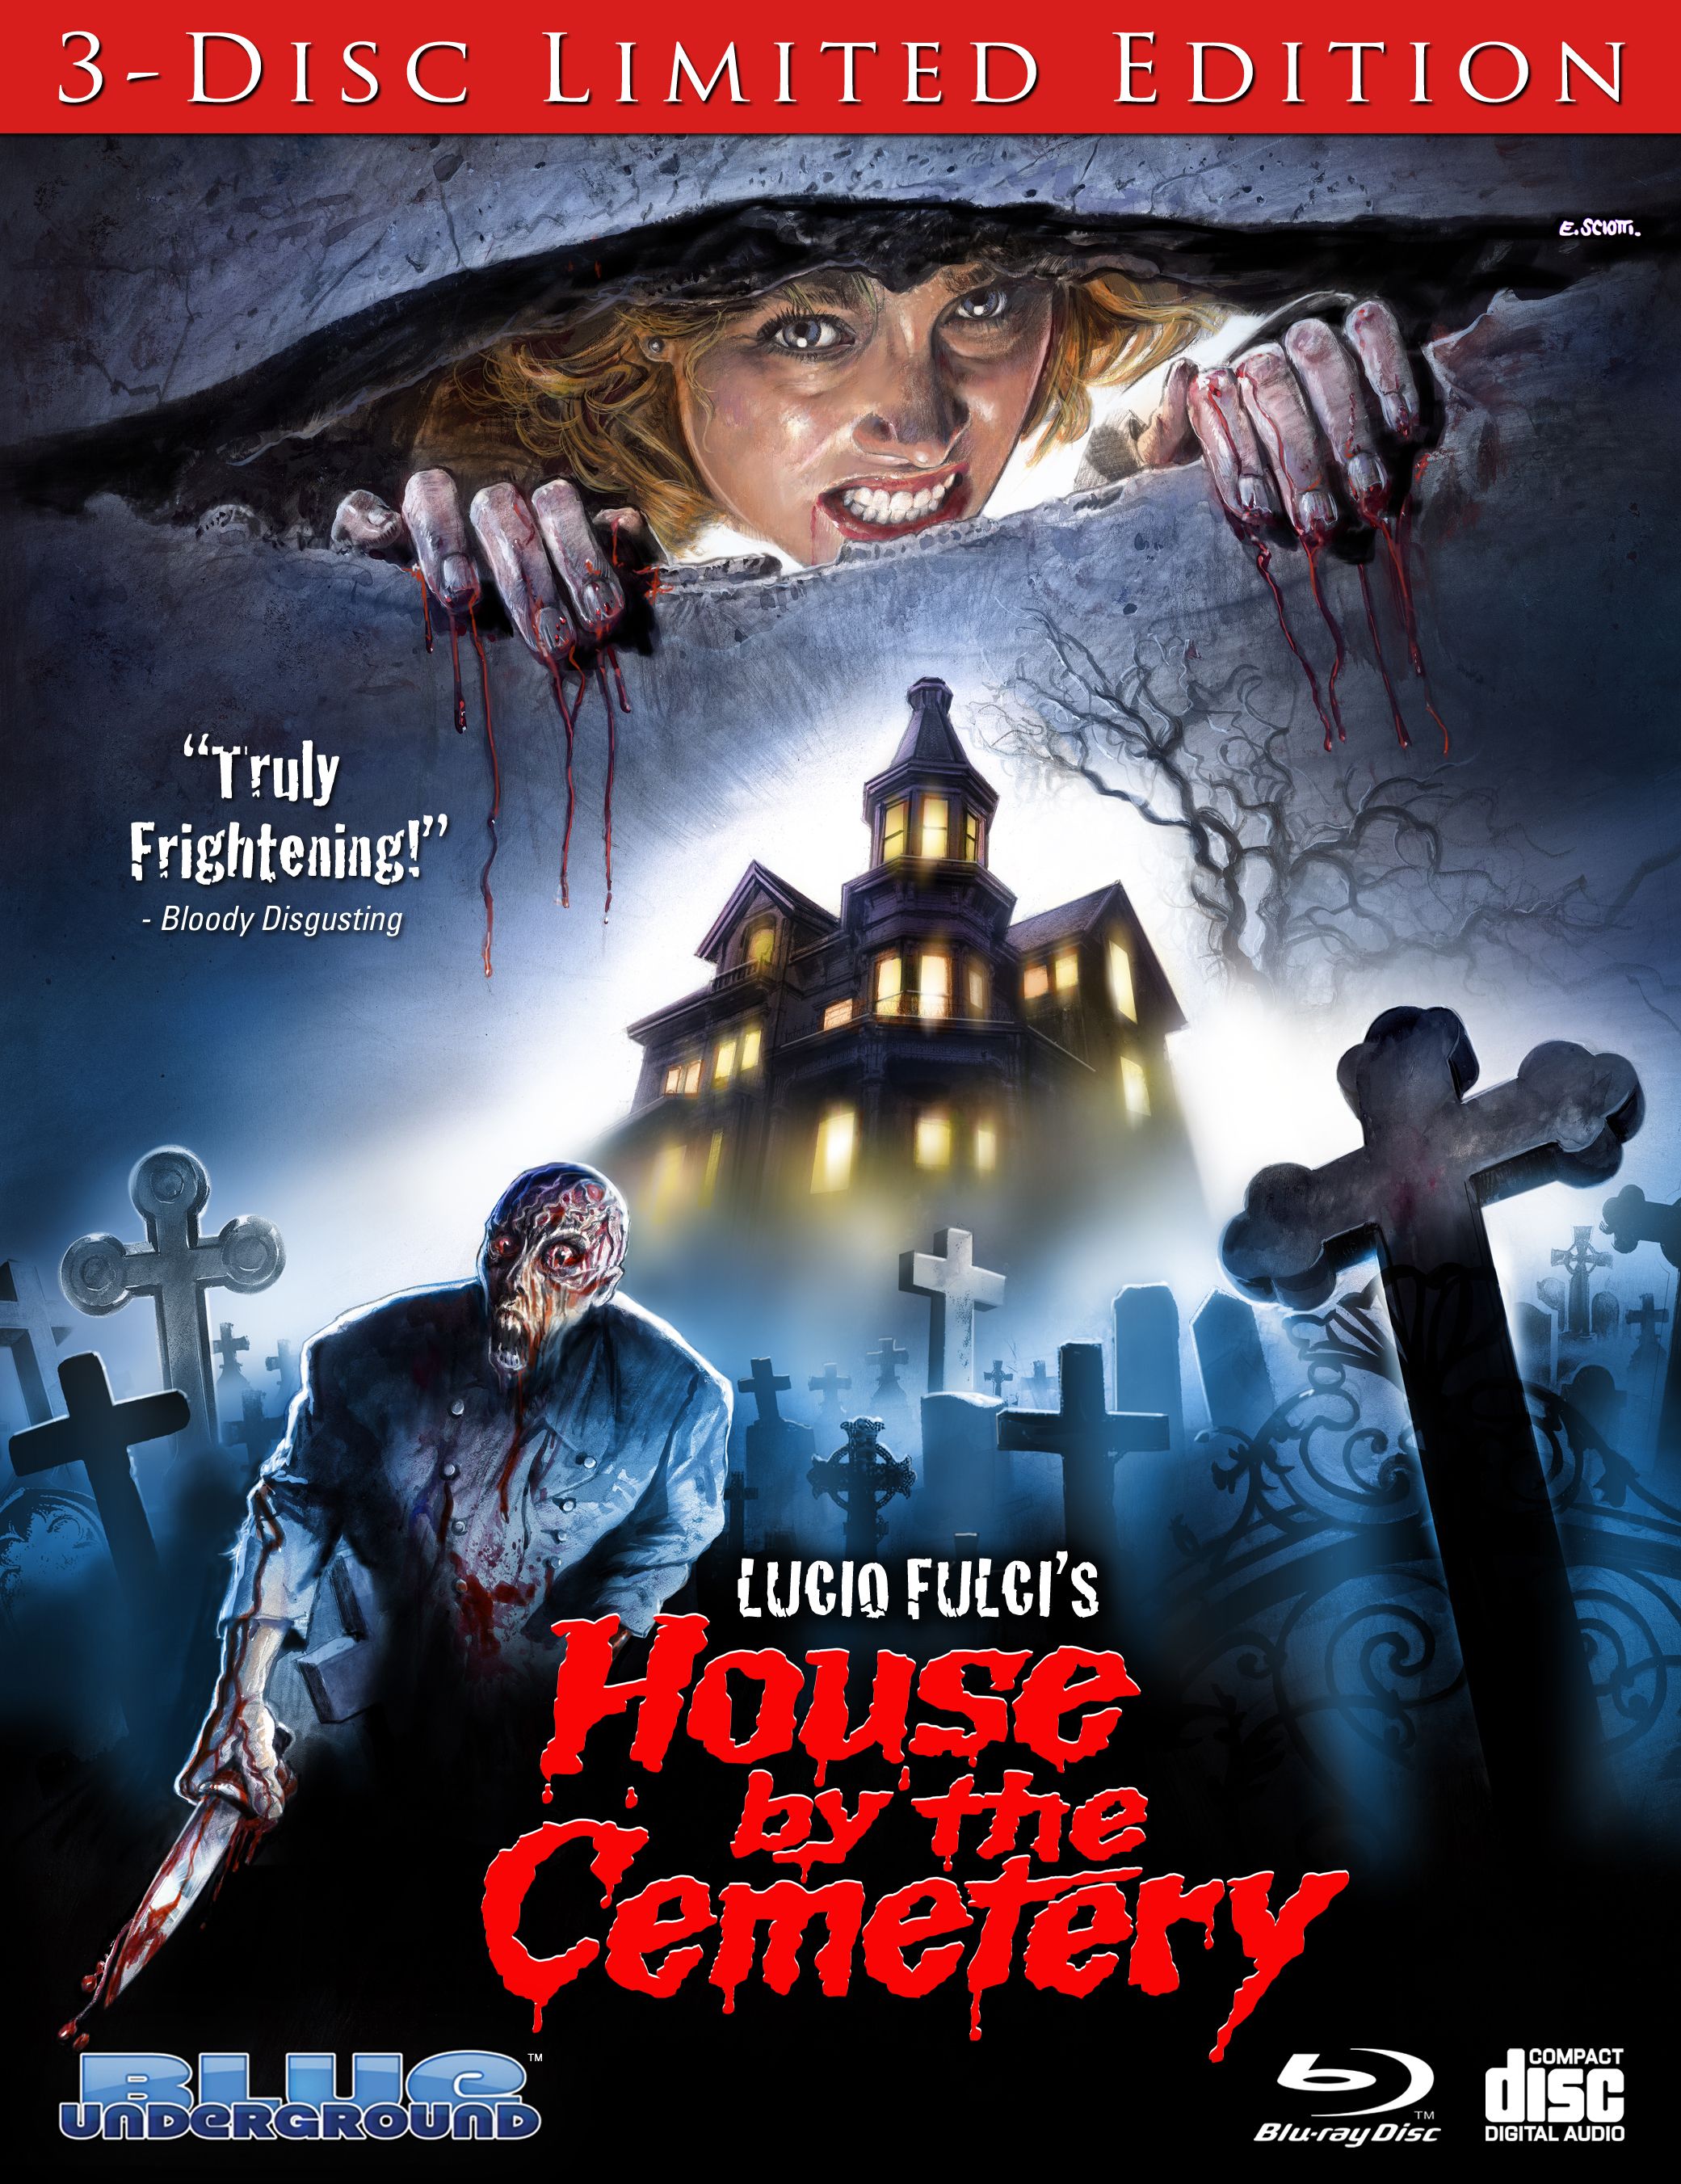 The House by the Cemetery blu-ray